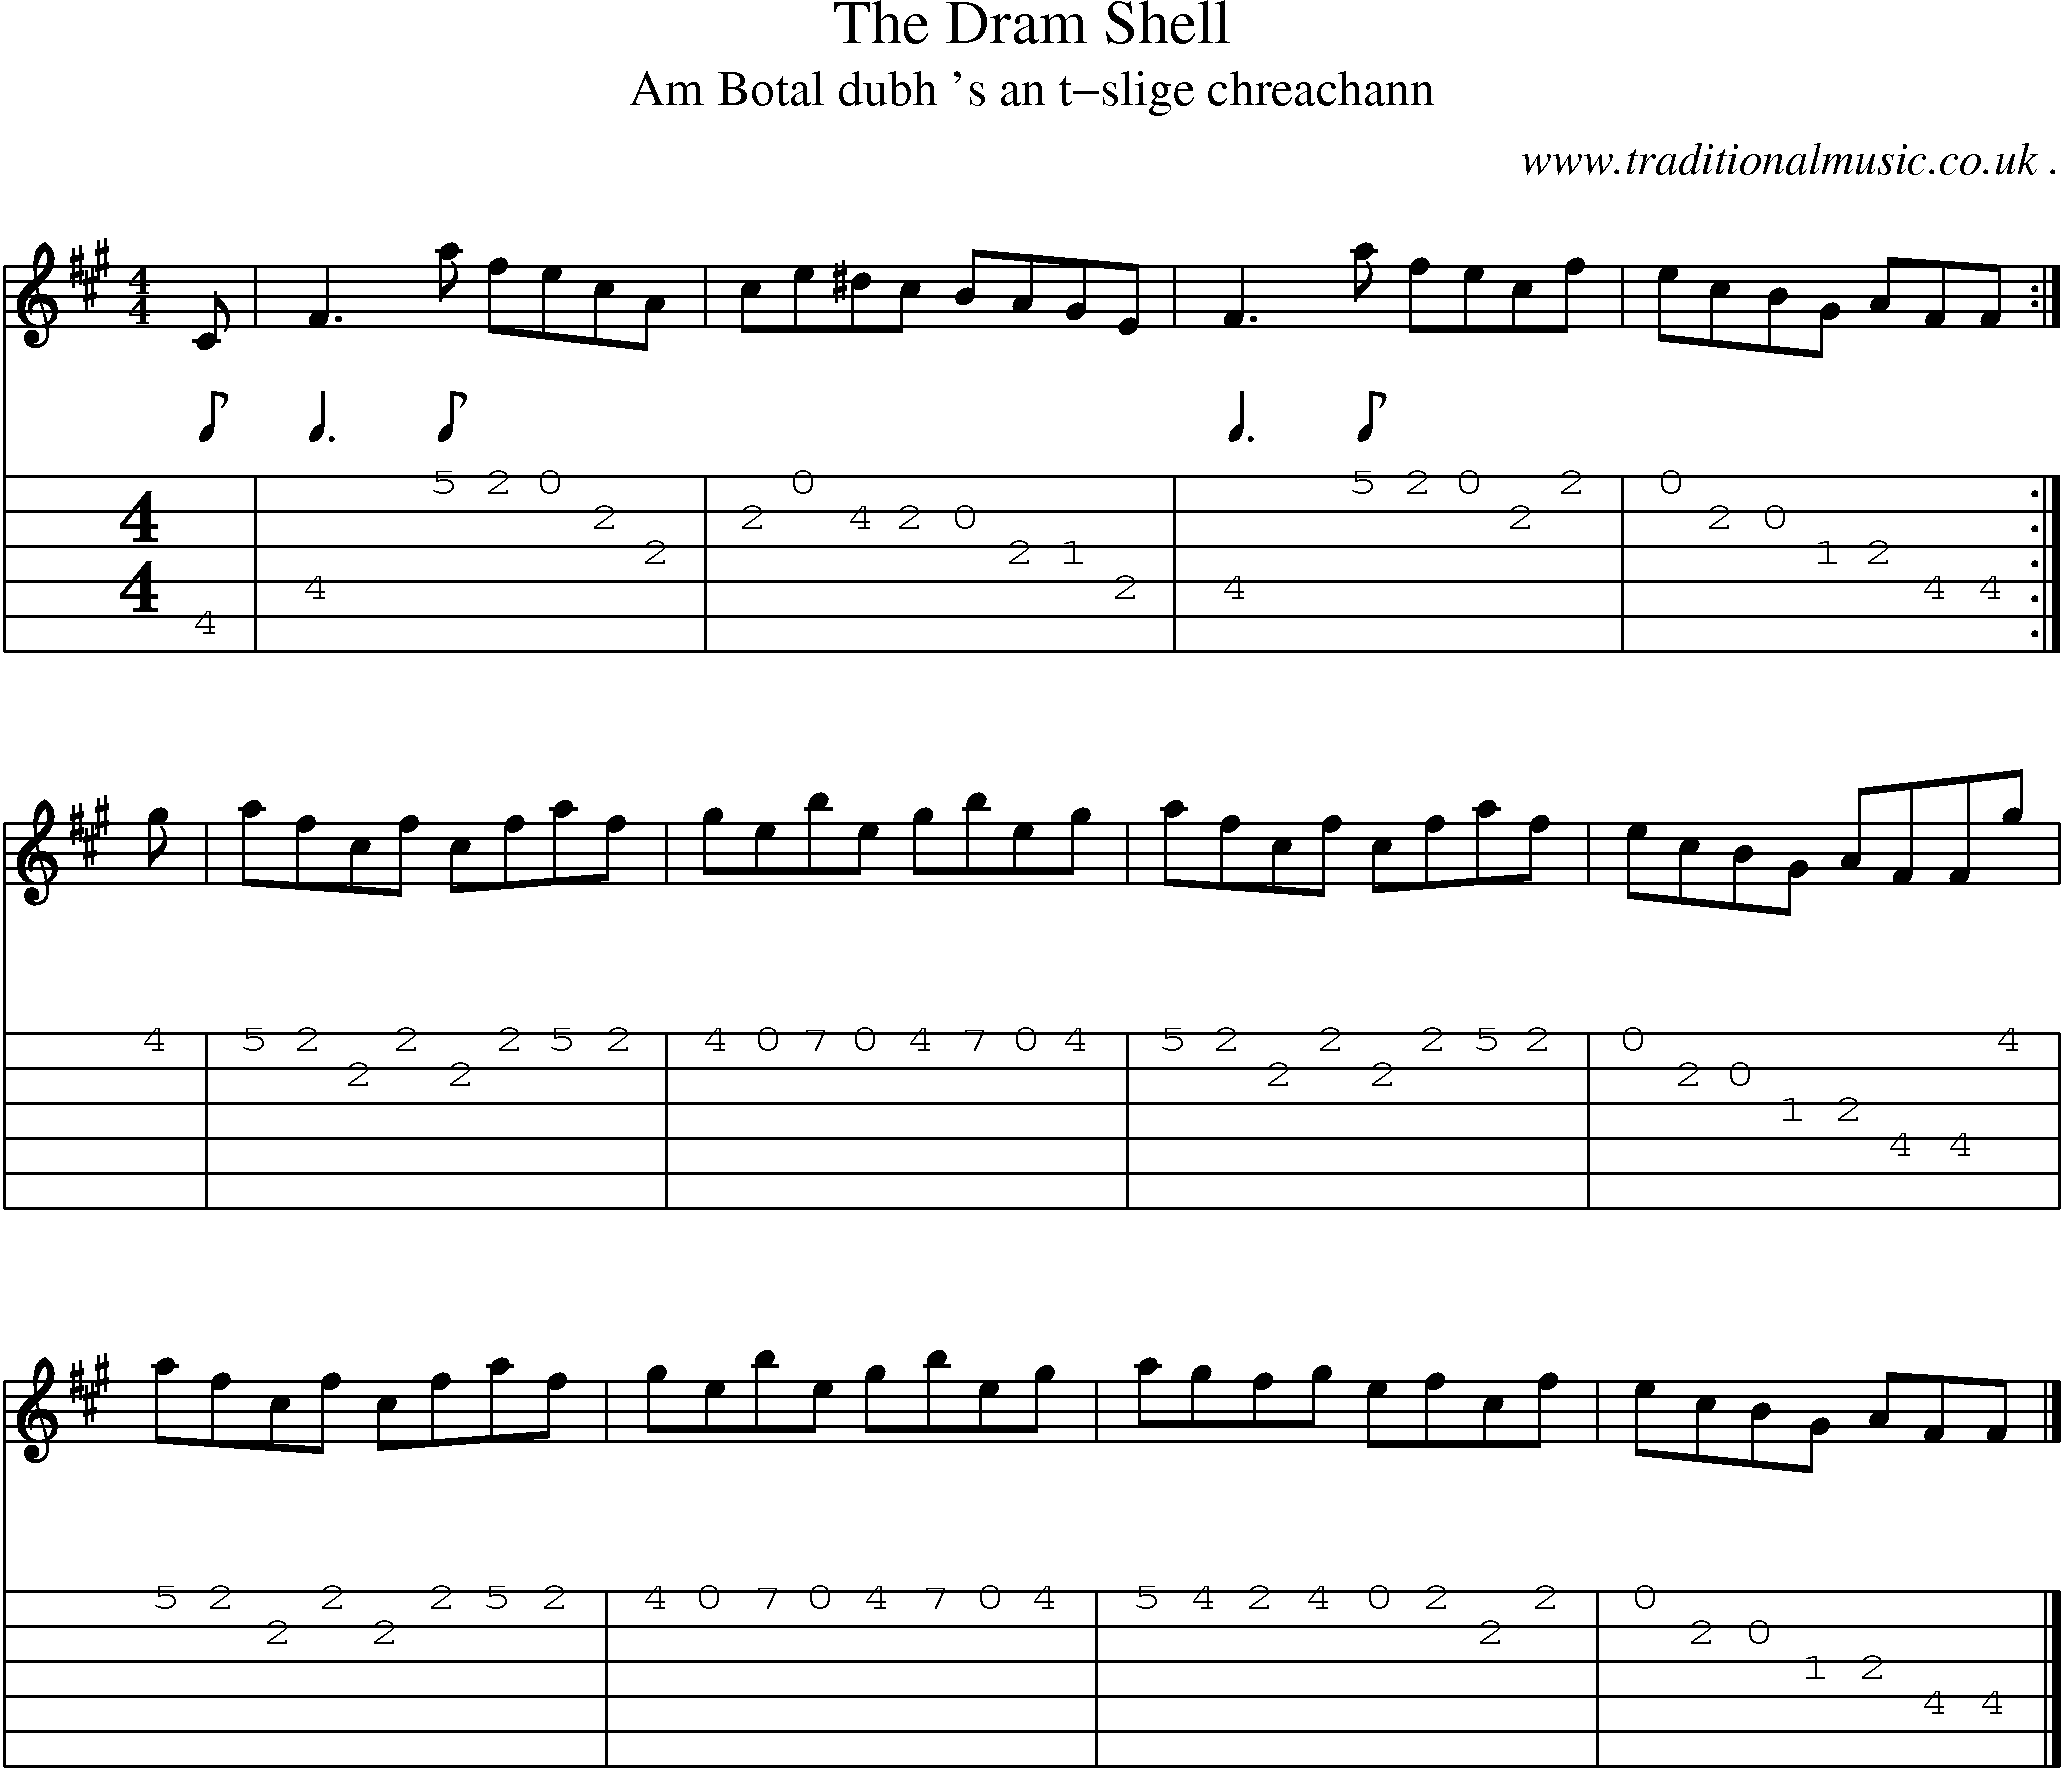 Sheet-music  score, Chords and Guitar Tabs for The Dram Shell